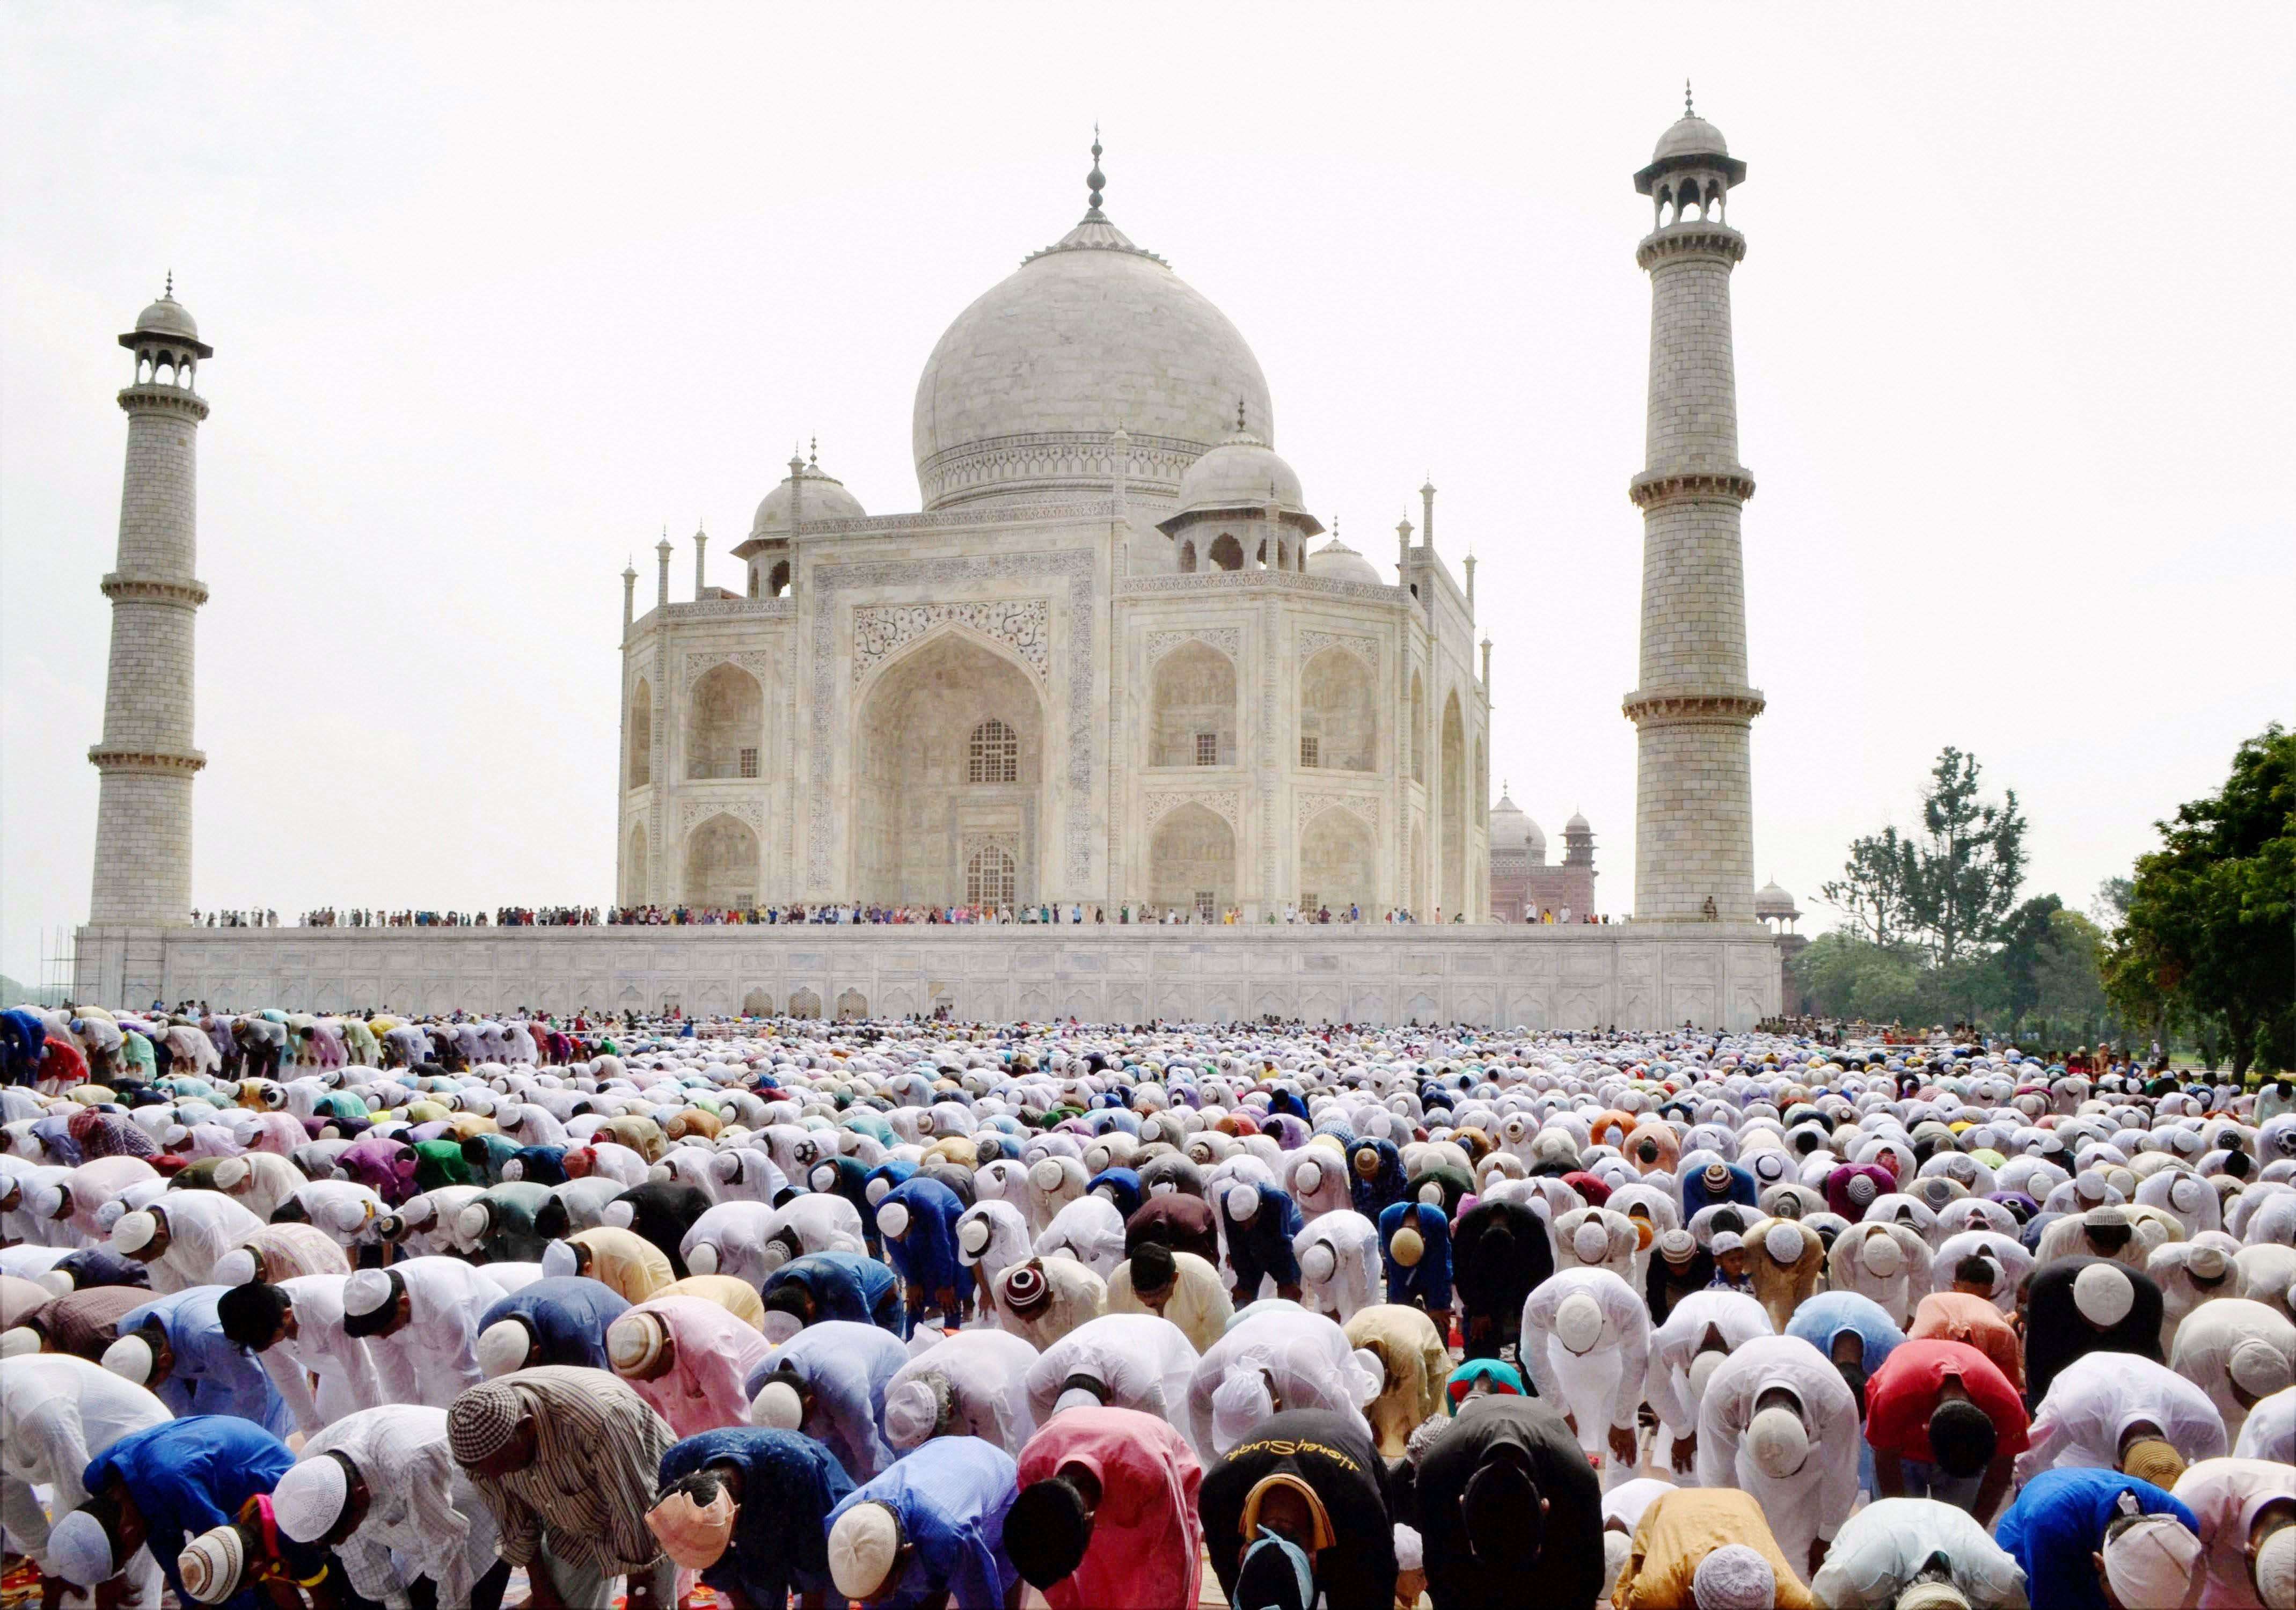 Muslims offer prayers in the premises of the Taj Mahal in Agra, India on the occasion of Eid-ul-Fitr. (PTI)